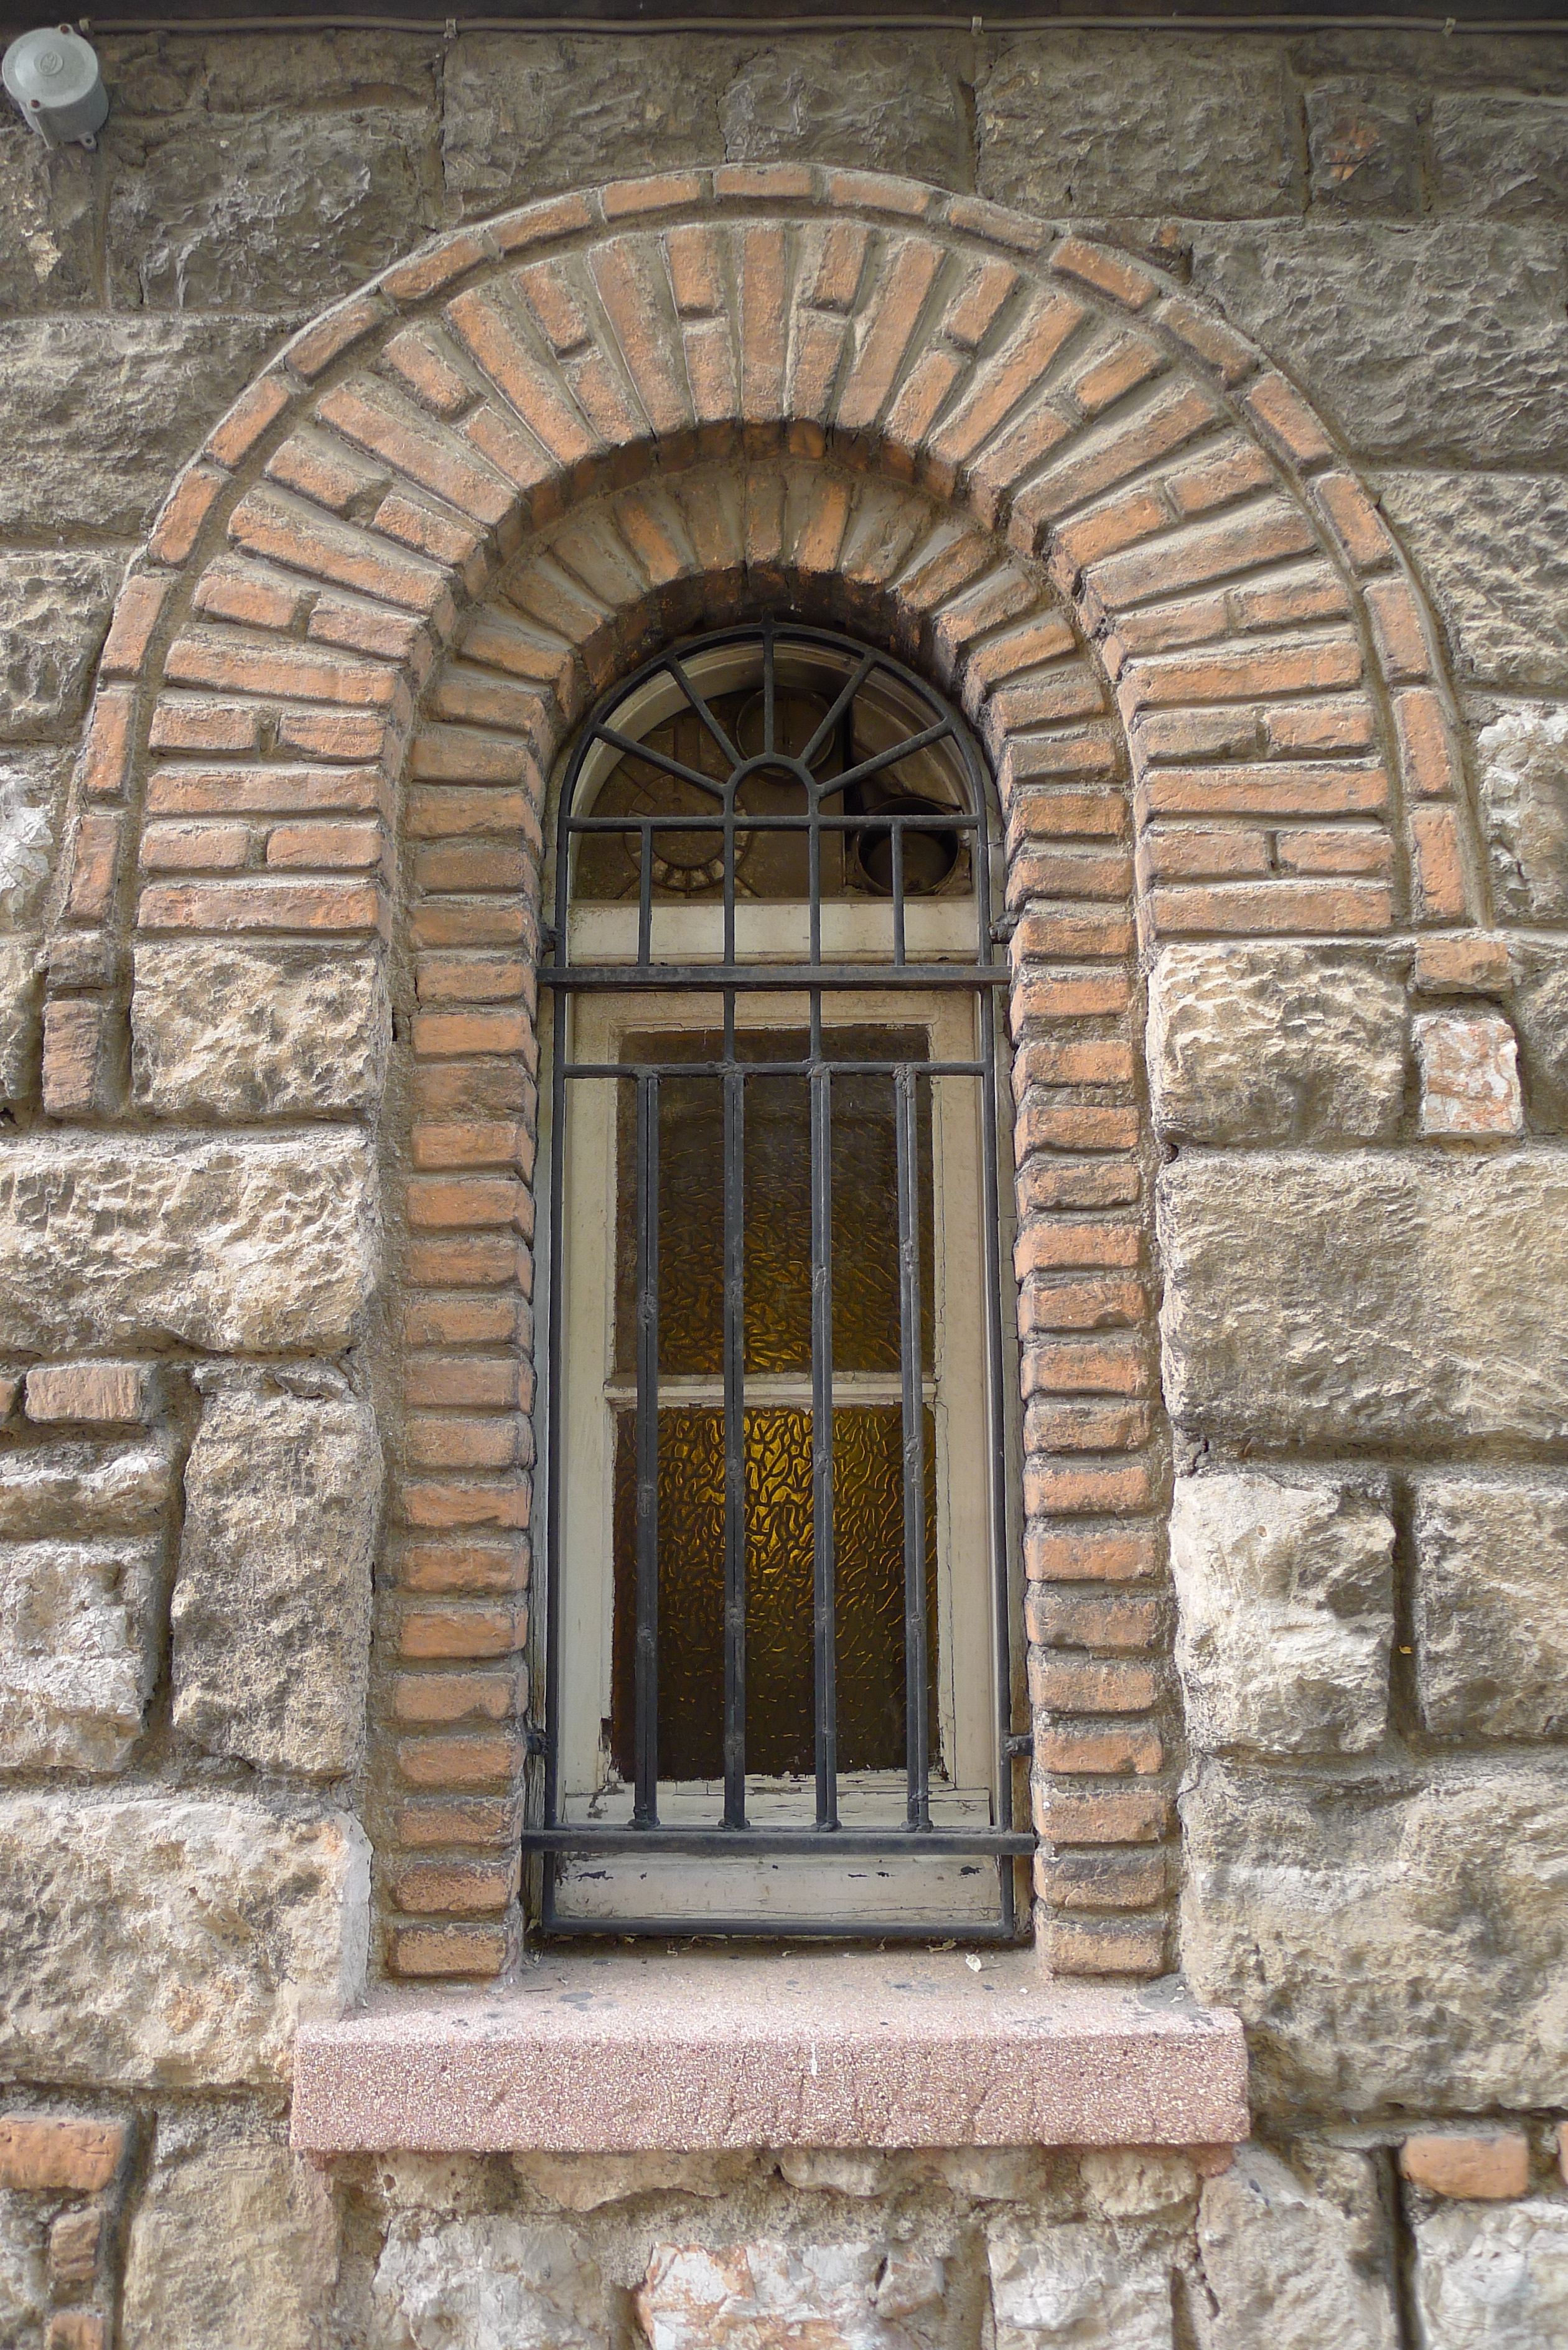 General view of the window (2014)